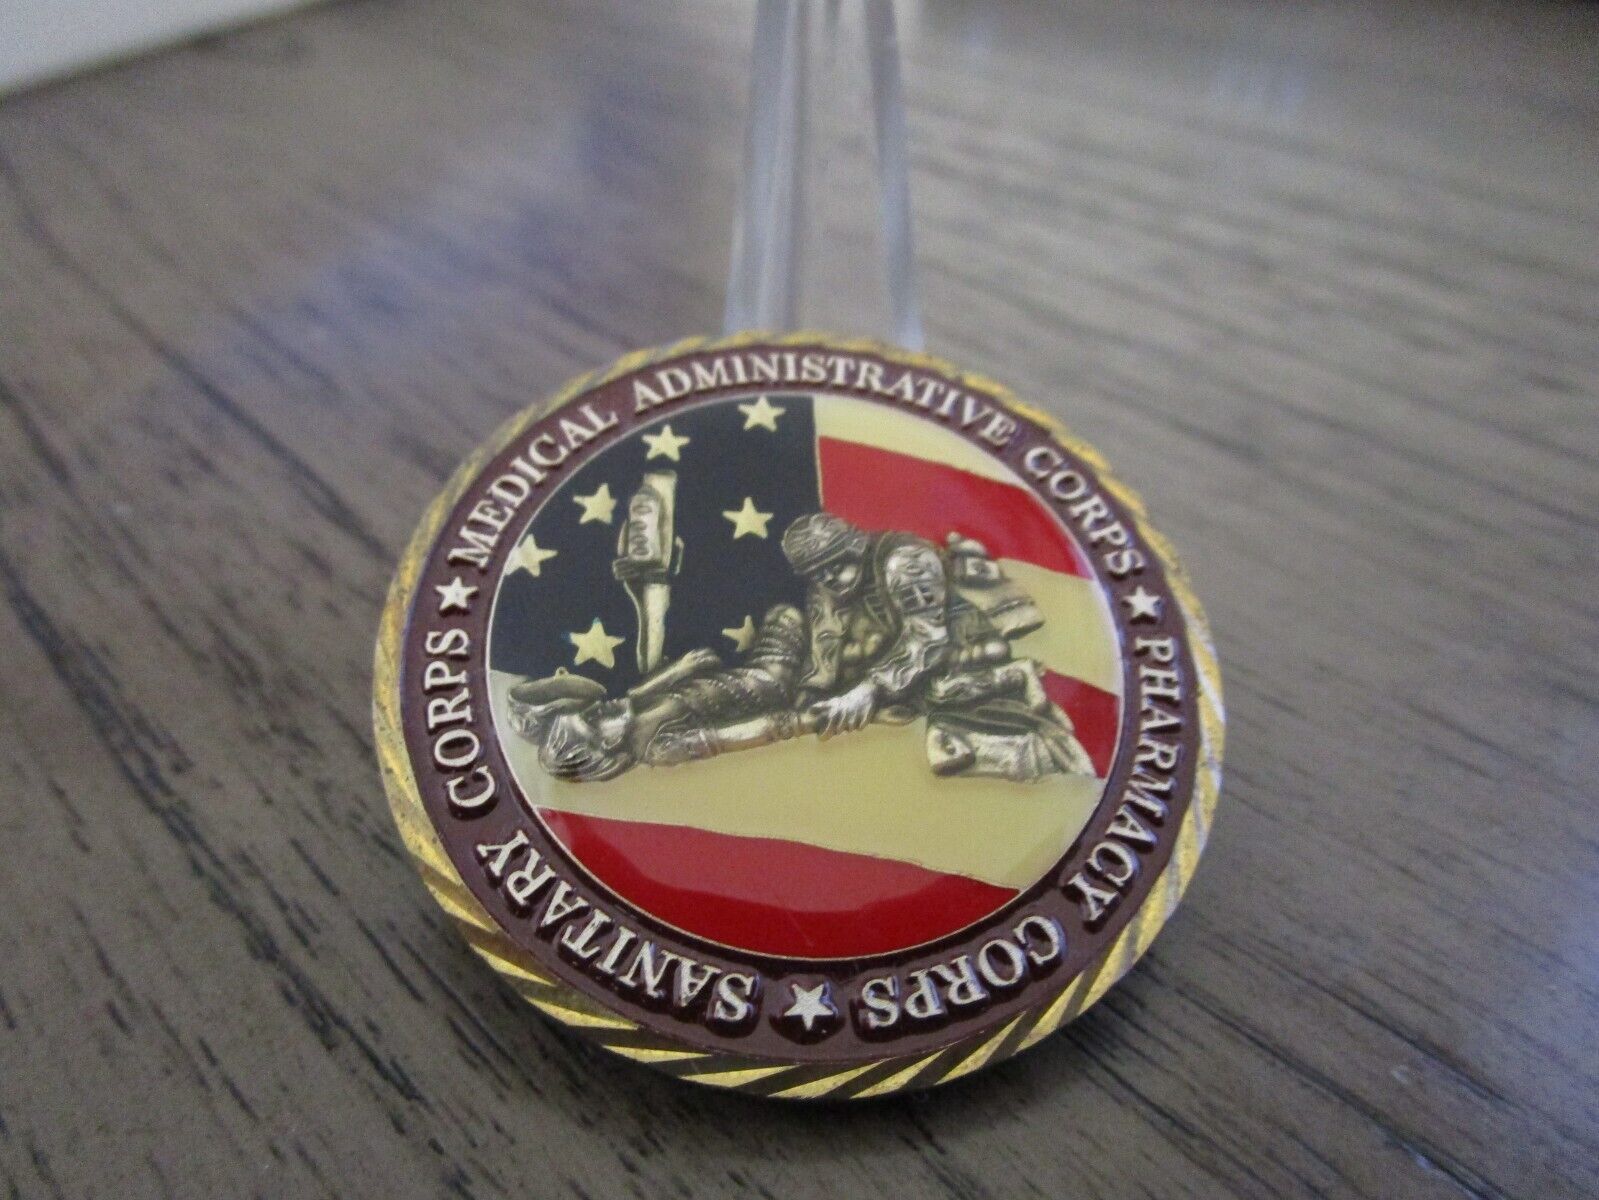 US Army Medical Service Corps Pharmacy Sanitary Admin Challenge Coin #219S